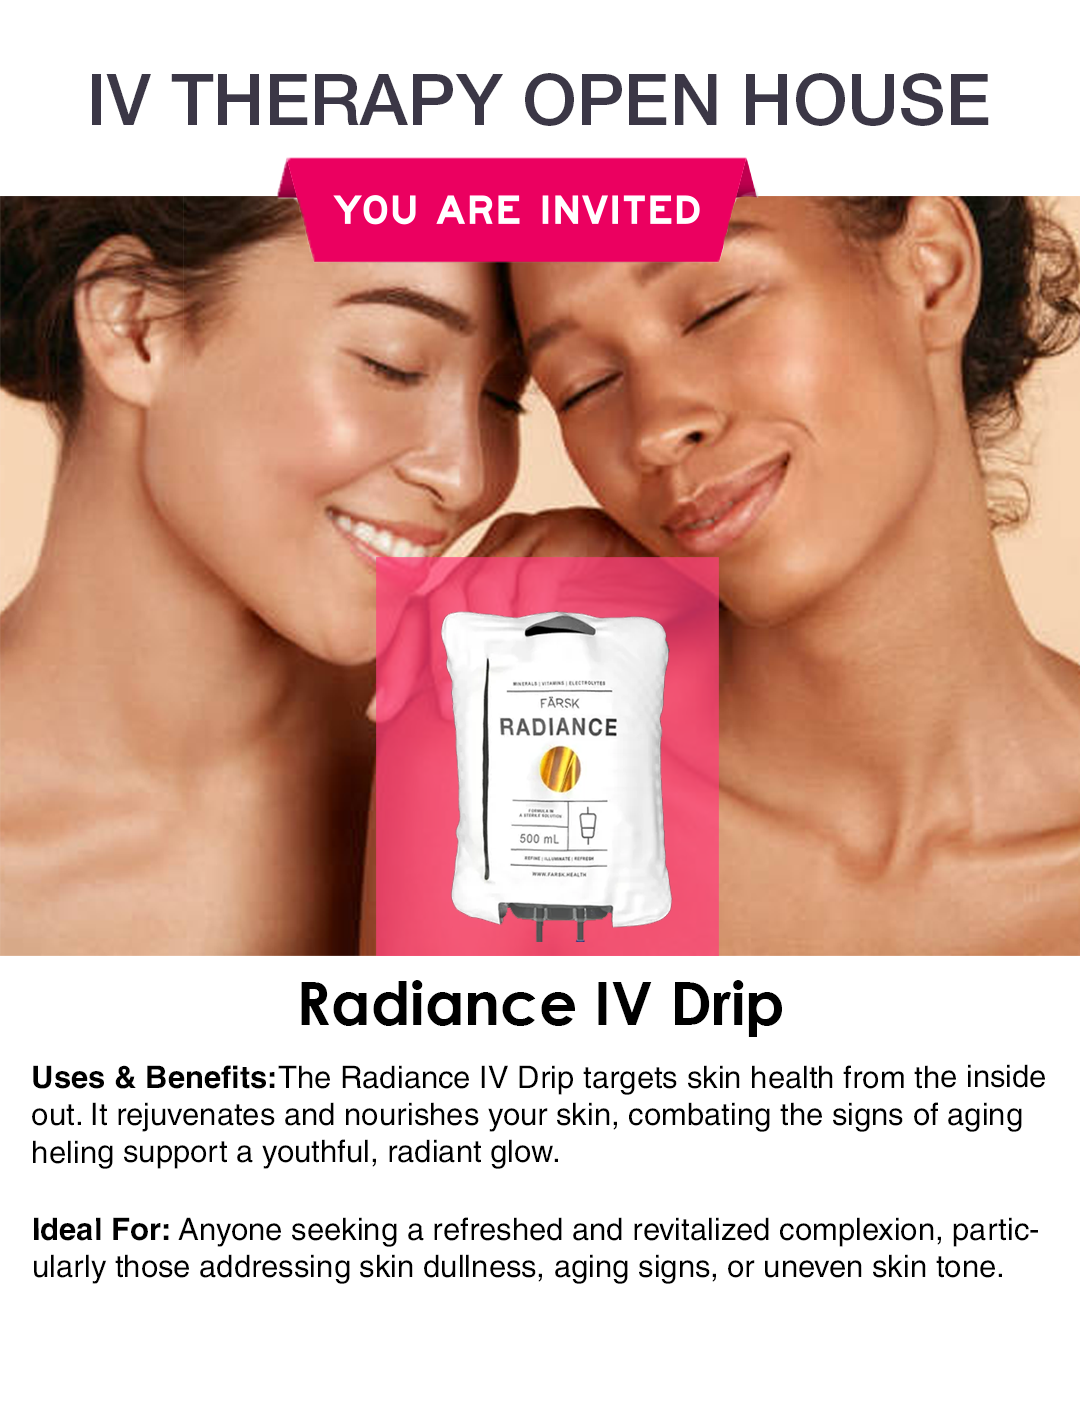 Radiance IV Drip treatment at The Lip Doctor for enhanced skin glow and vitality